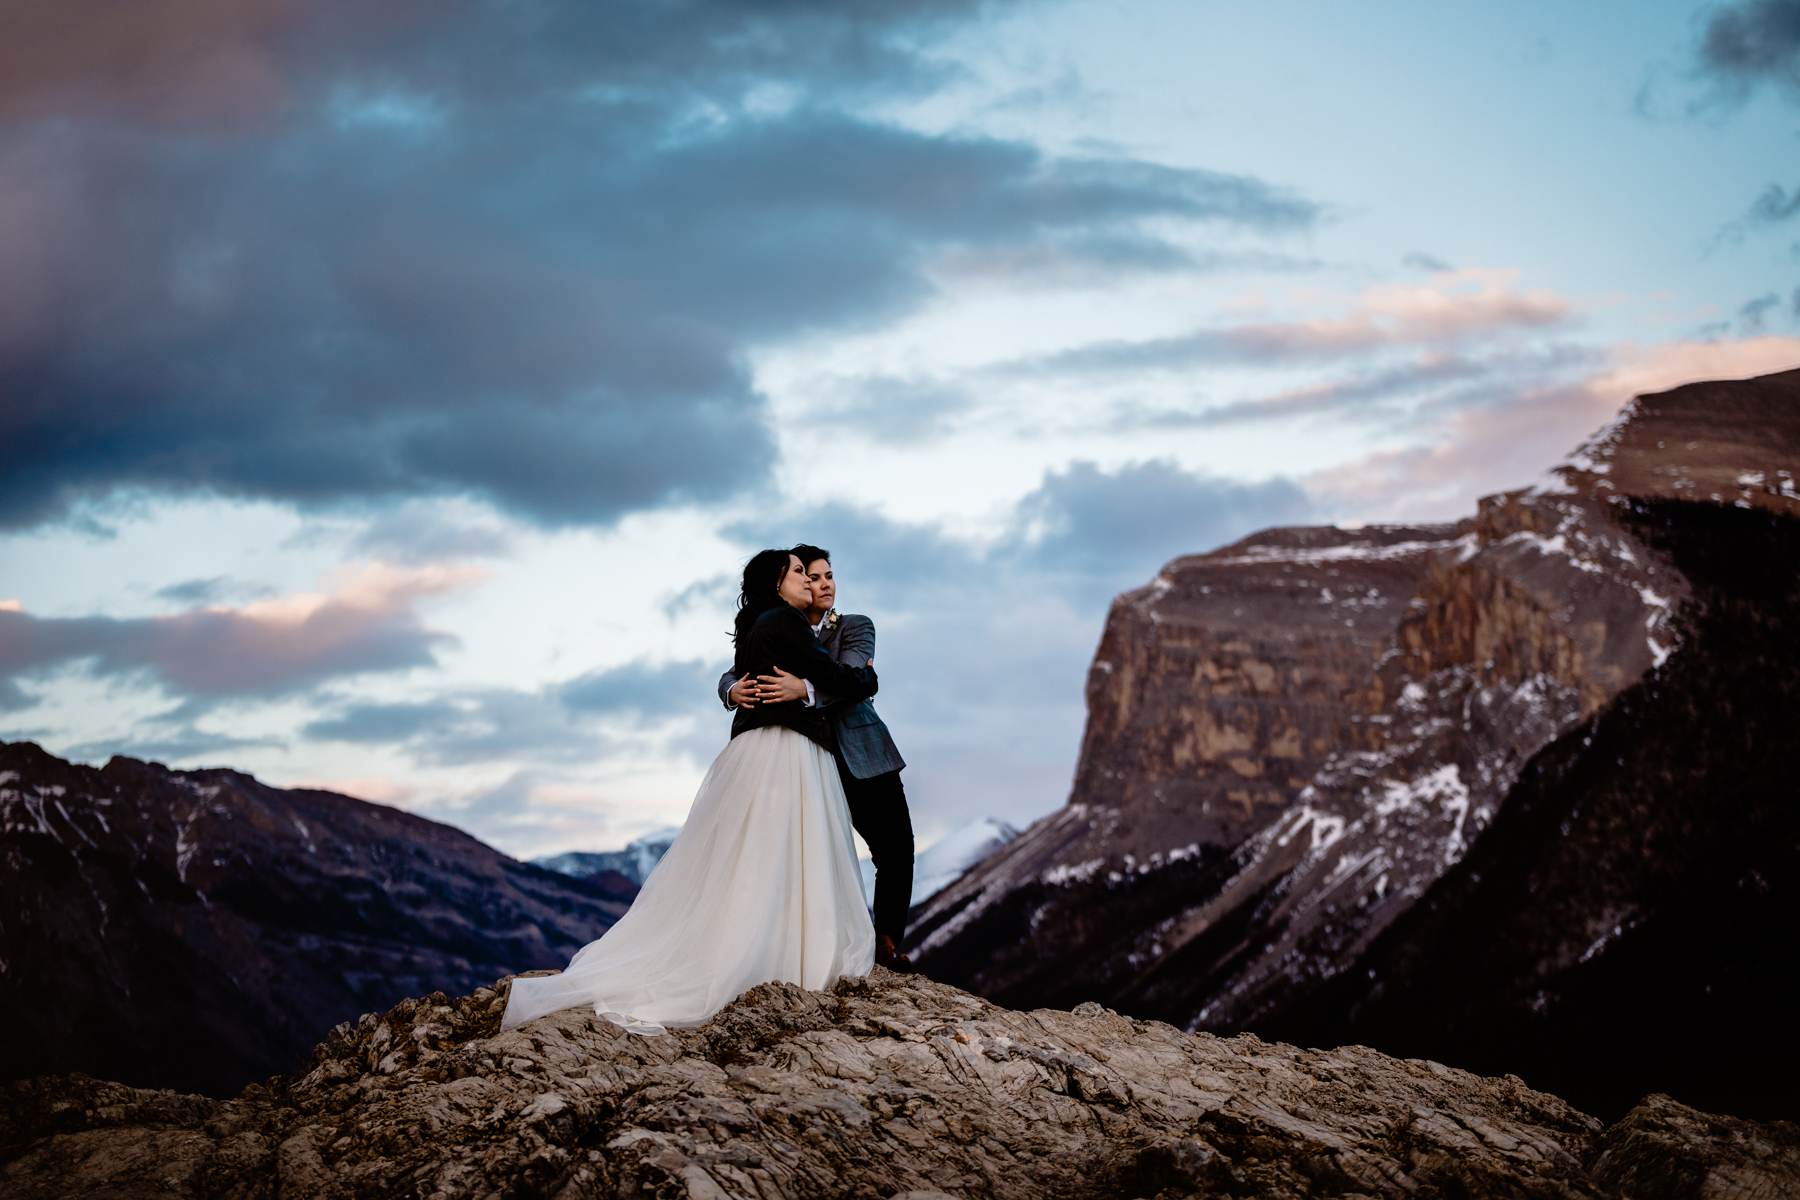 Banff National Park Elopement Photography with LGBTQ-friendly photographers - Image 31